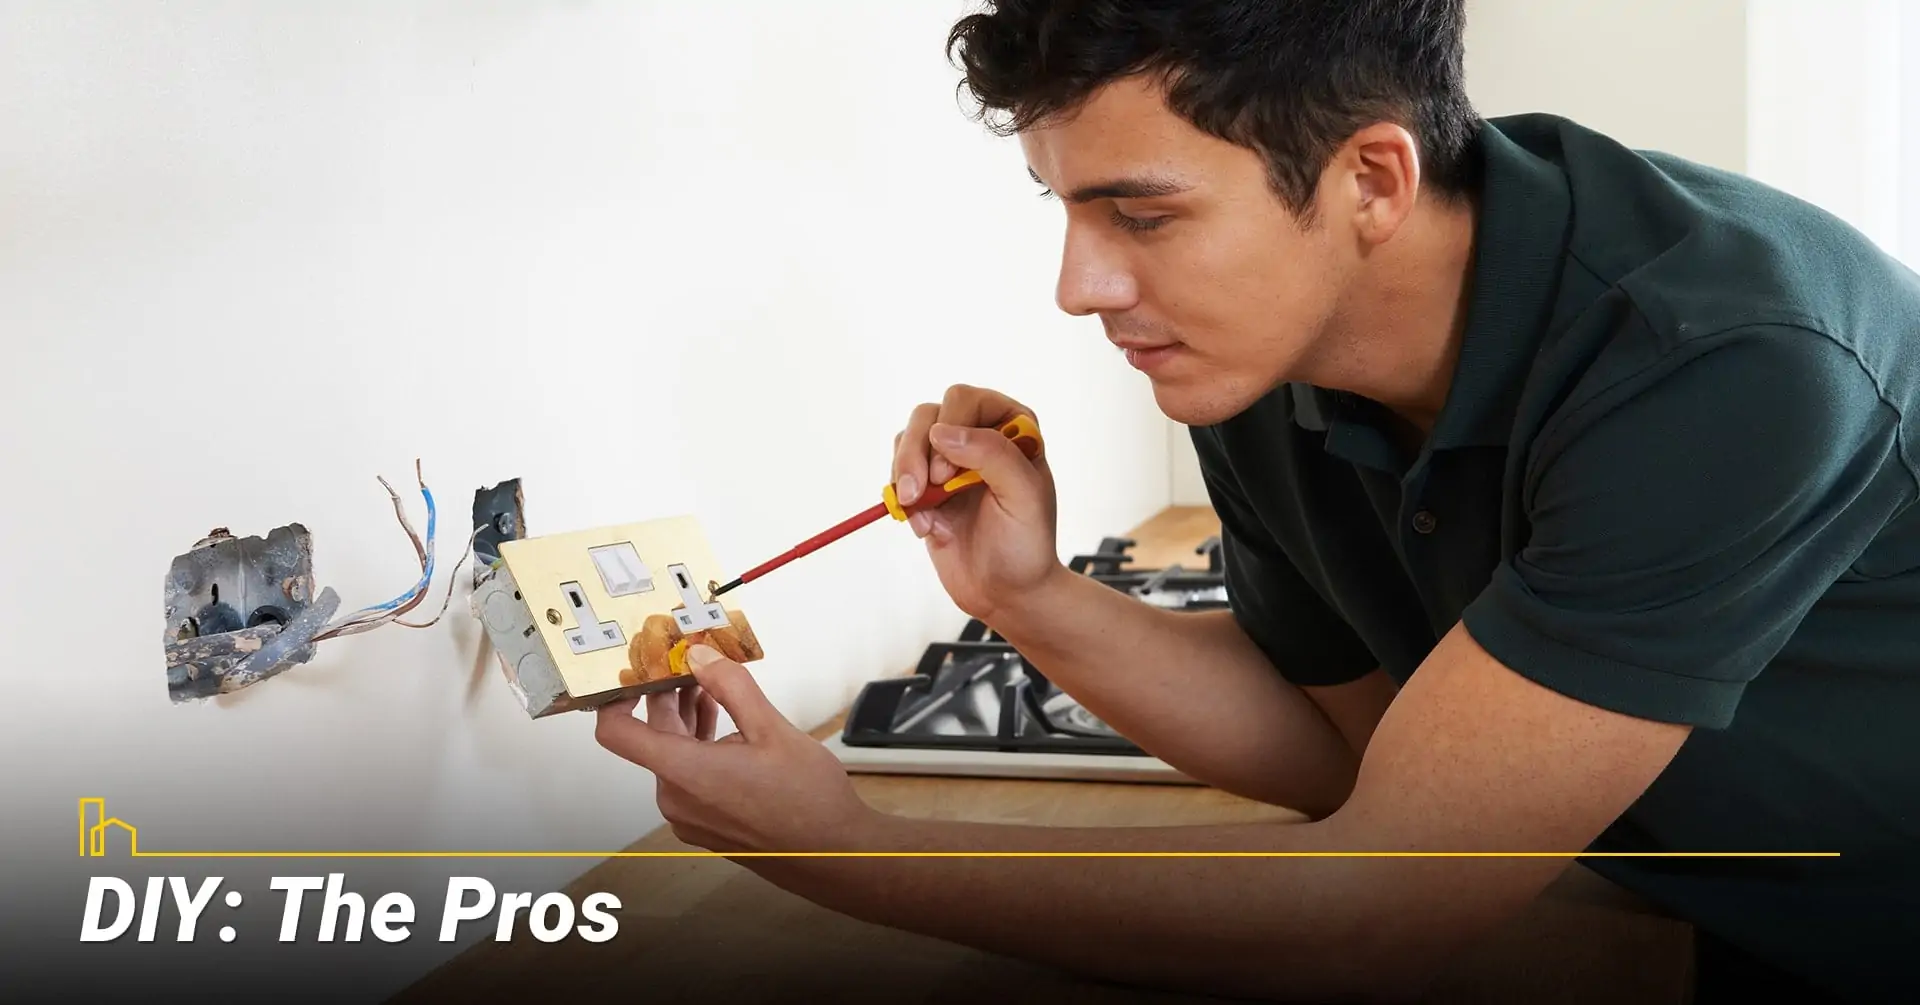 DIY: The Pros, the advantage of doing it yourself